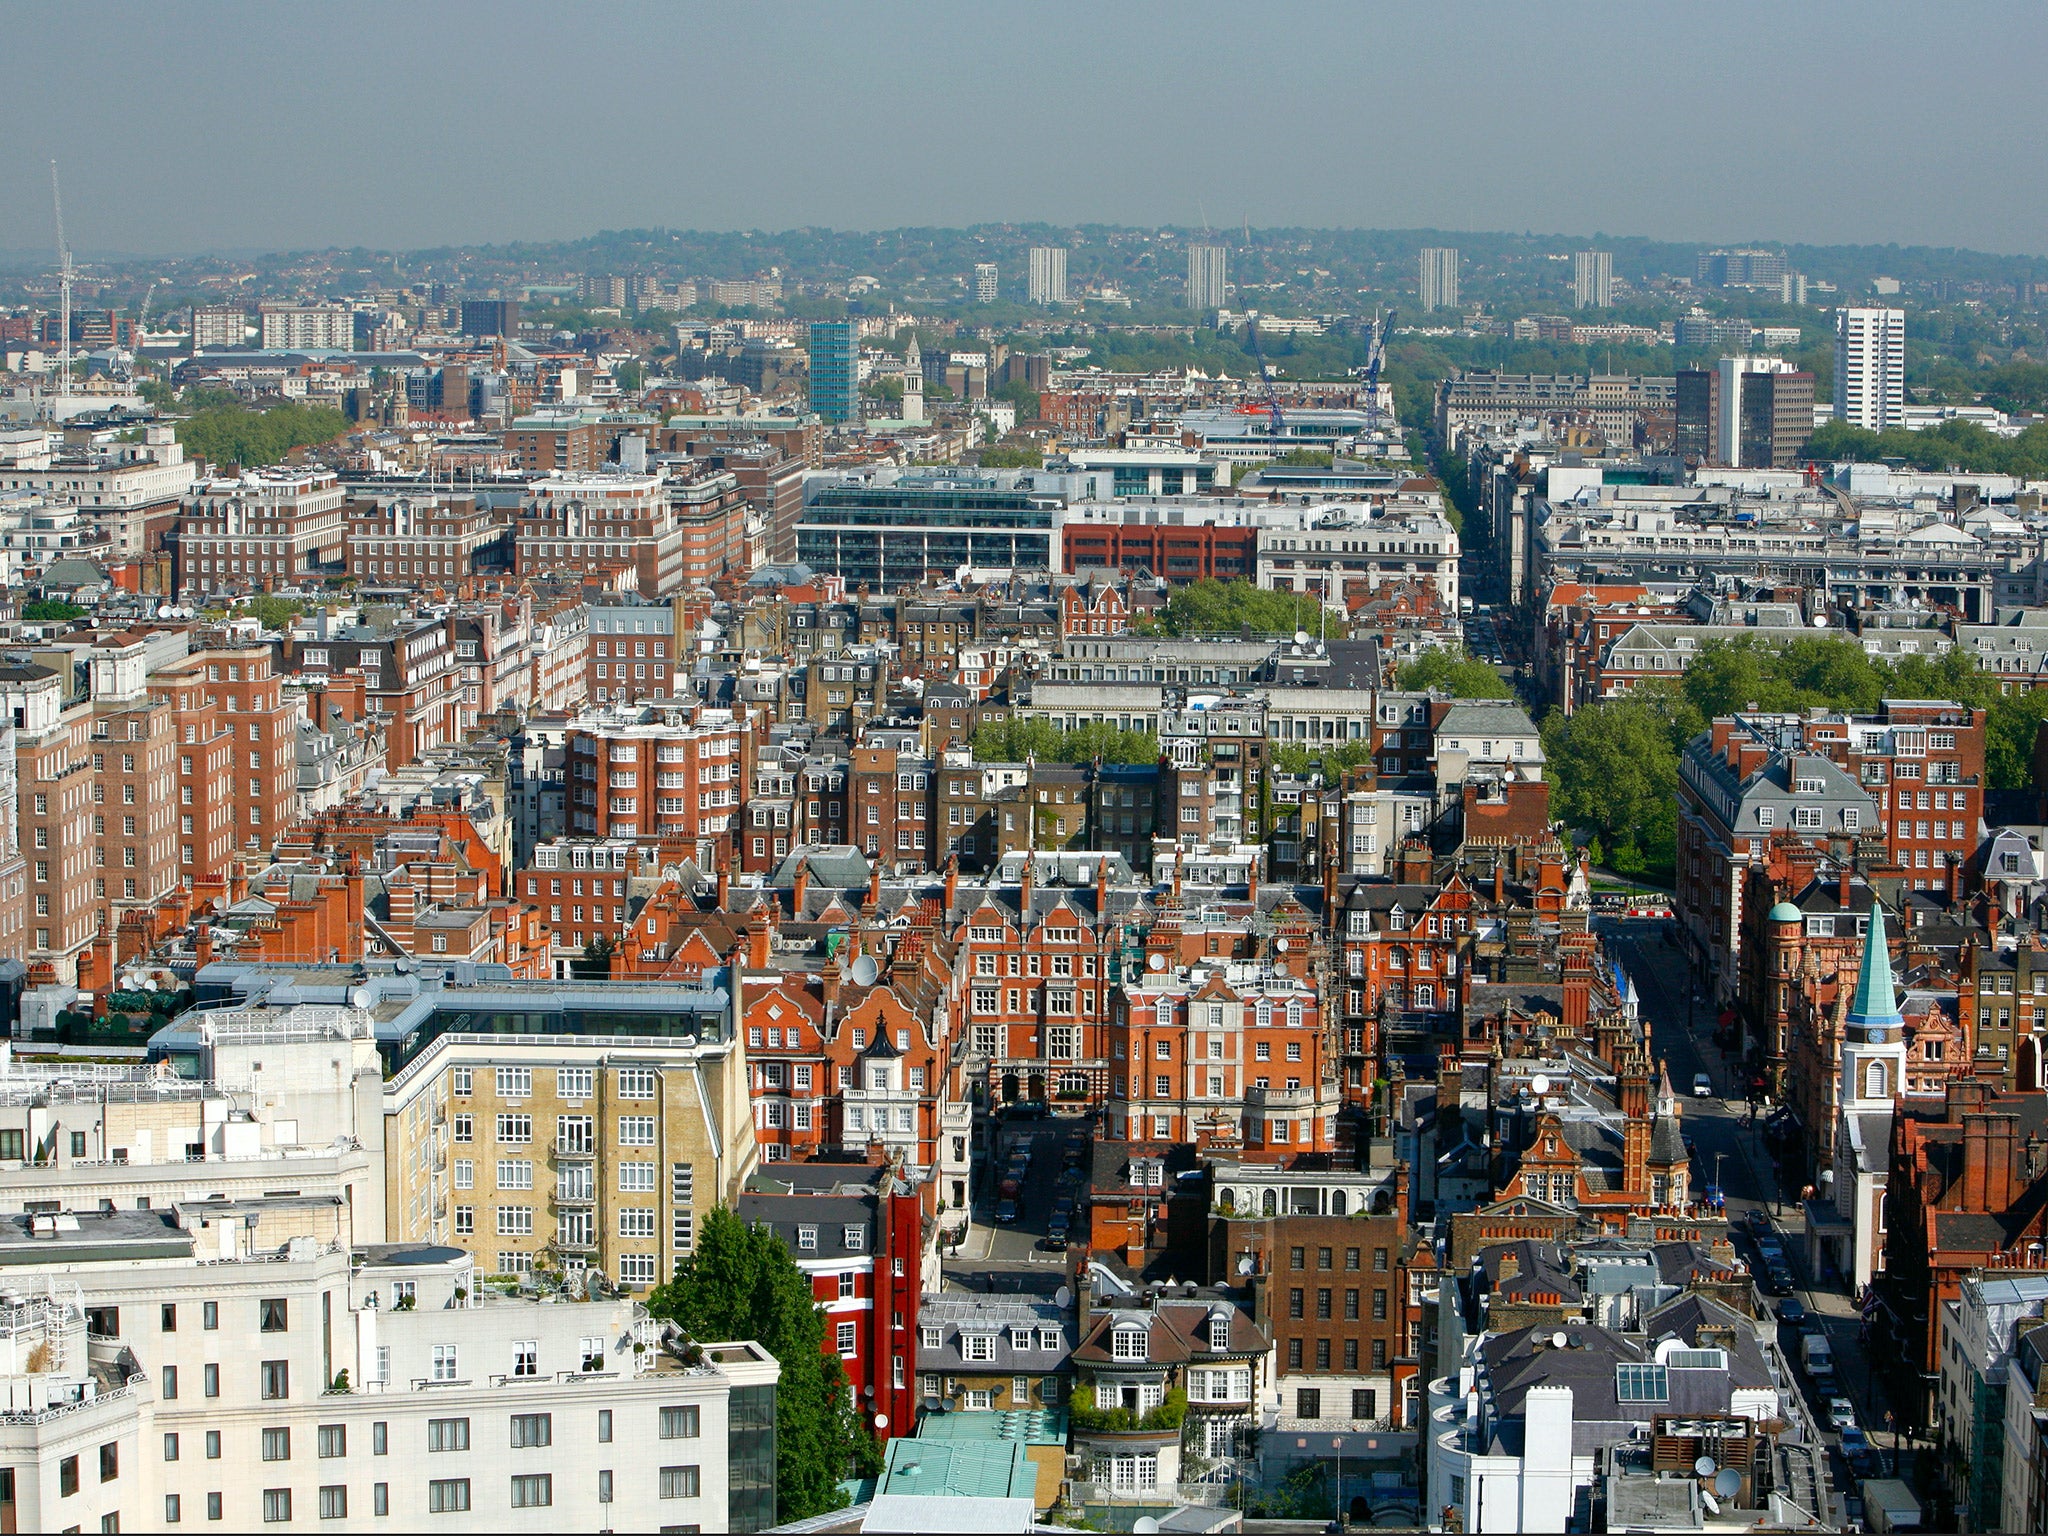 A roofline view of Mayfair